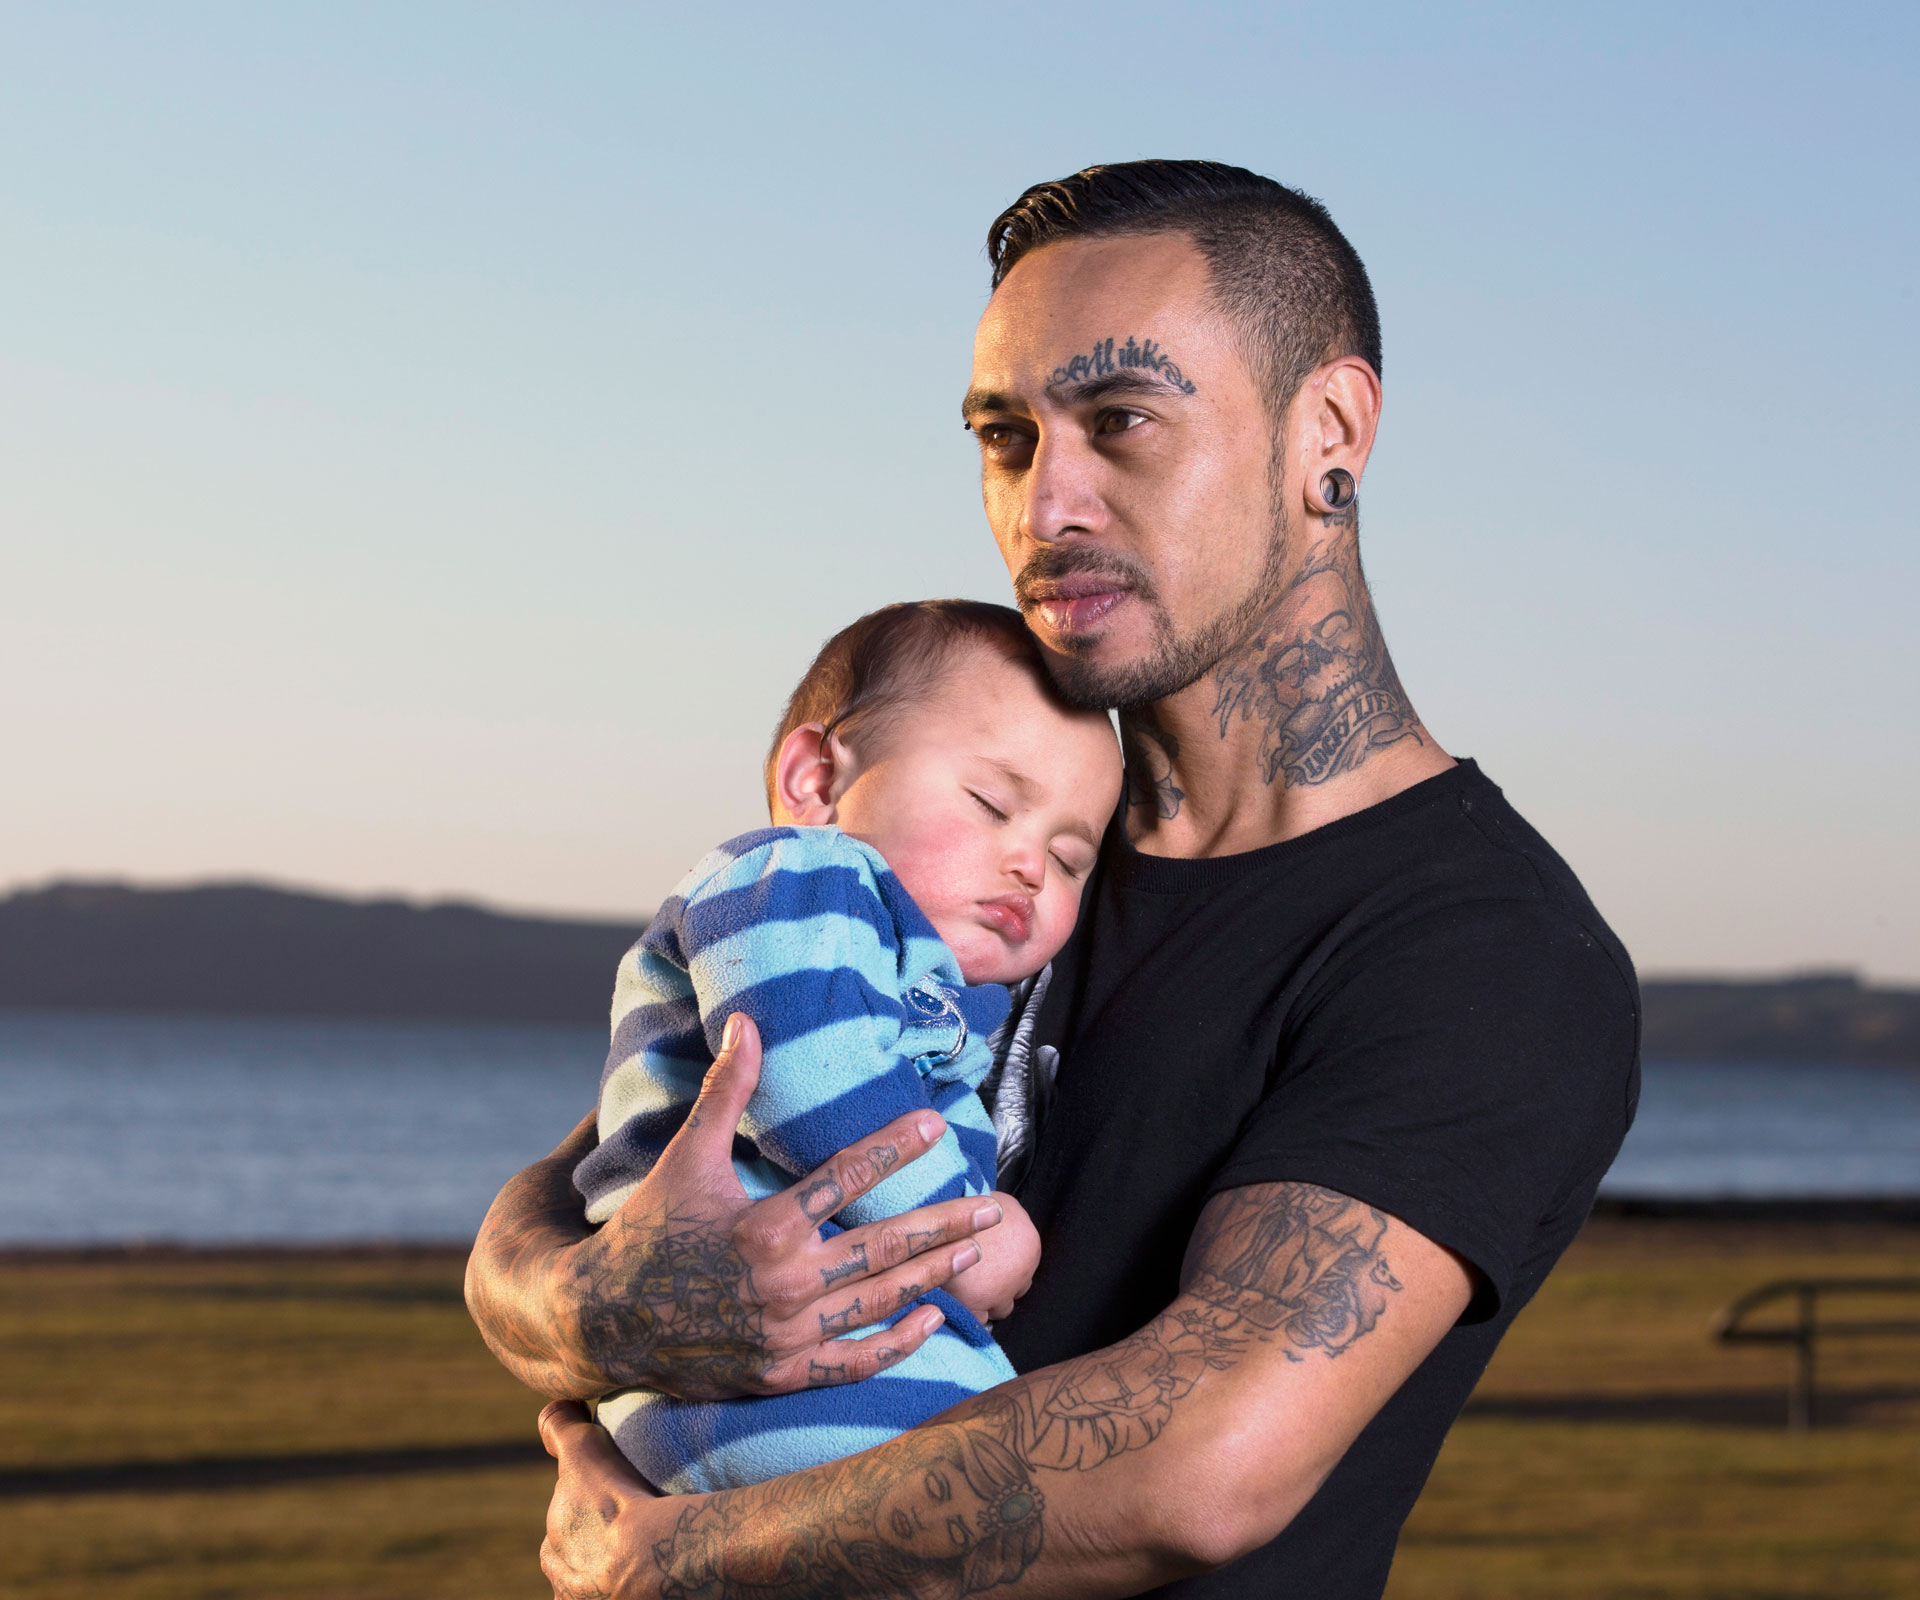 Tattoos and tutus: “I’m not your average Dad”